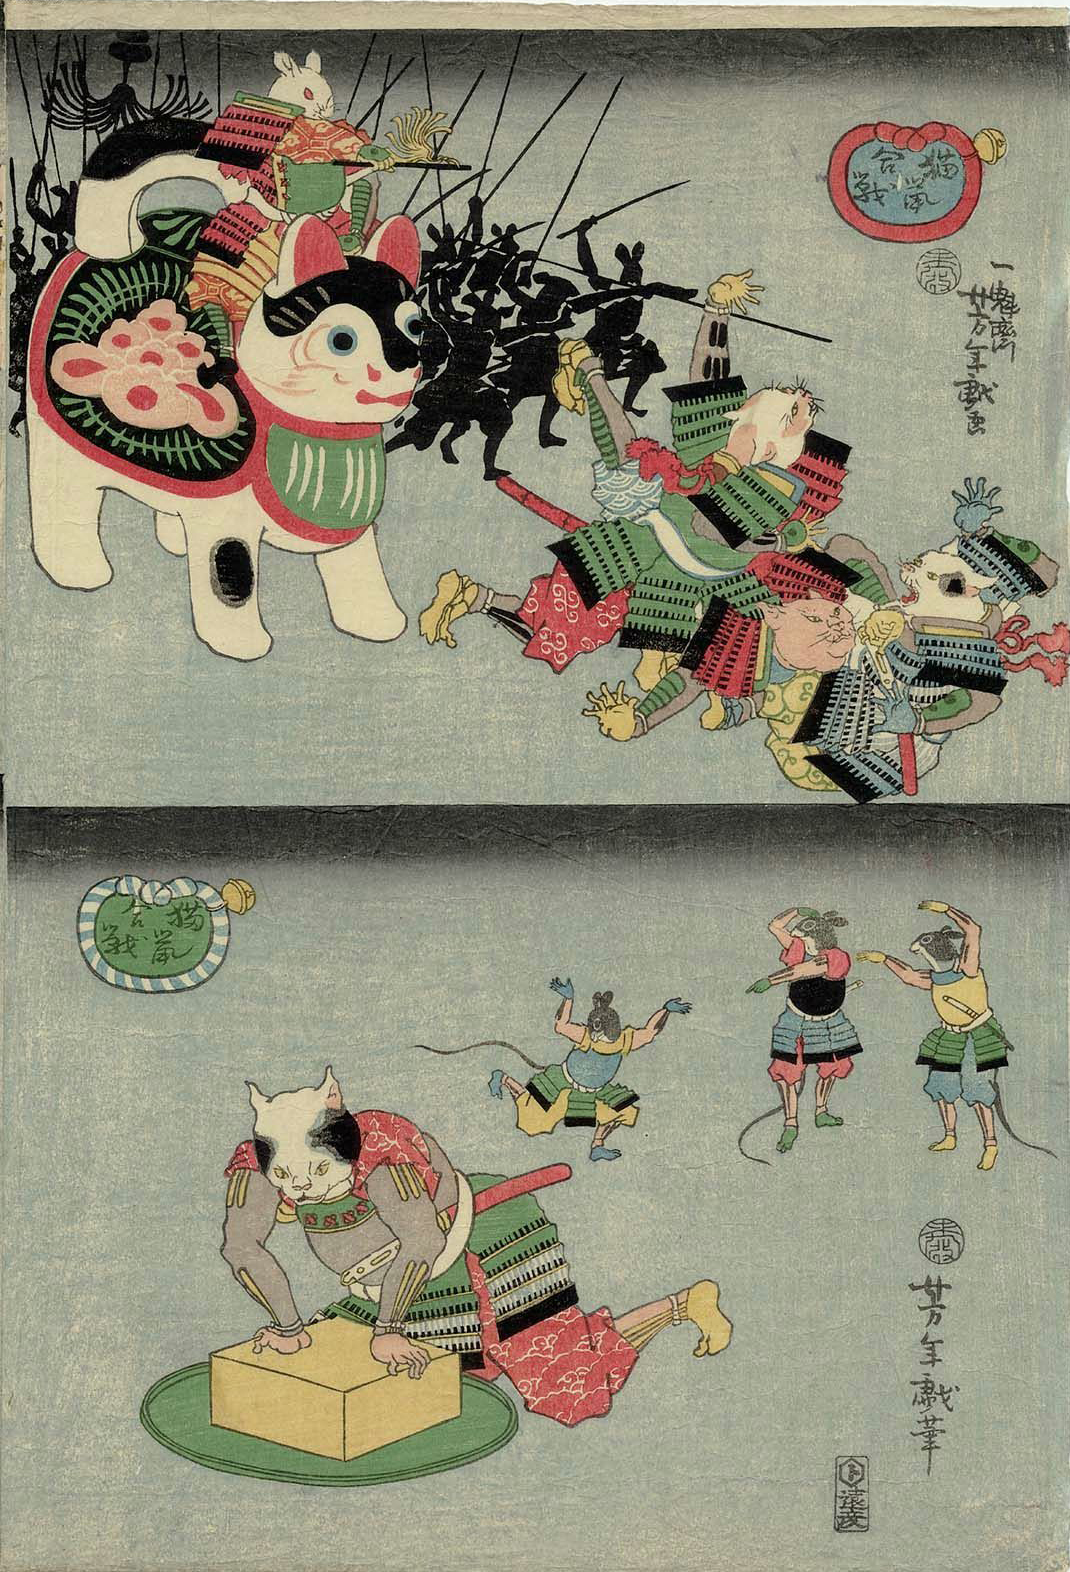 Yoshitoshi - Mouse army advances, general on a dog/ Cat kneels - Battle of Cats and Mice